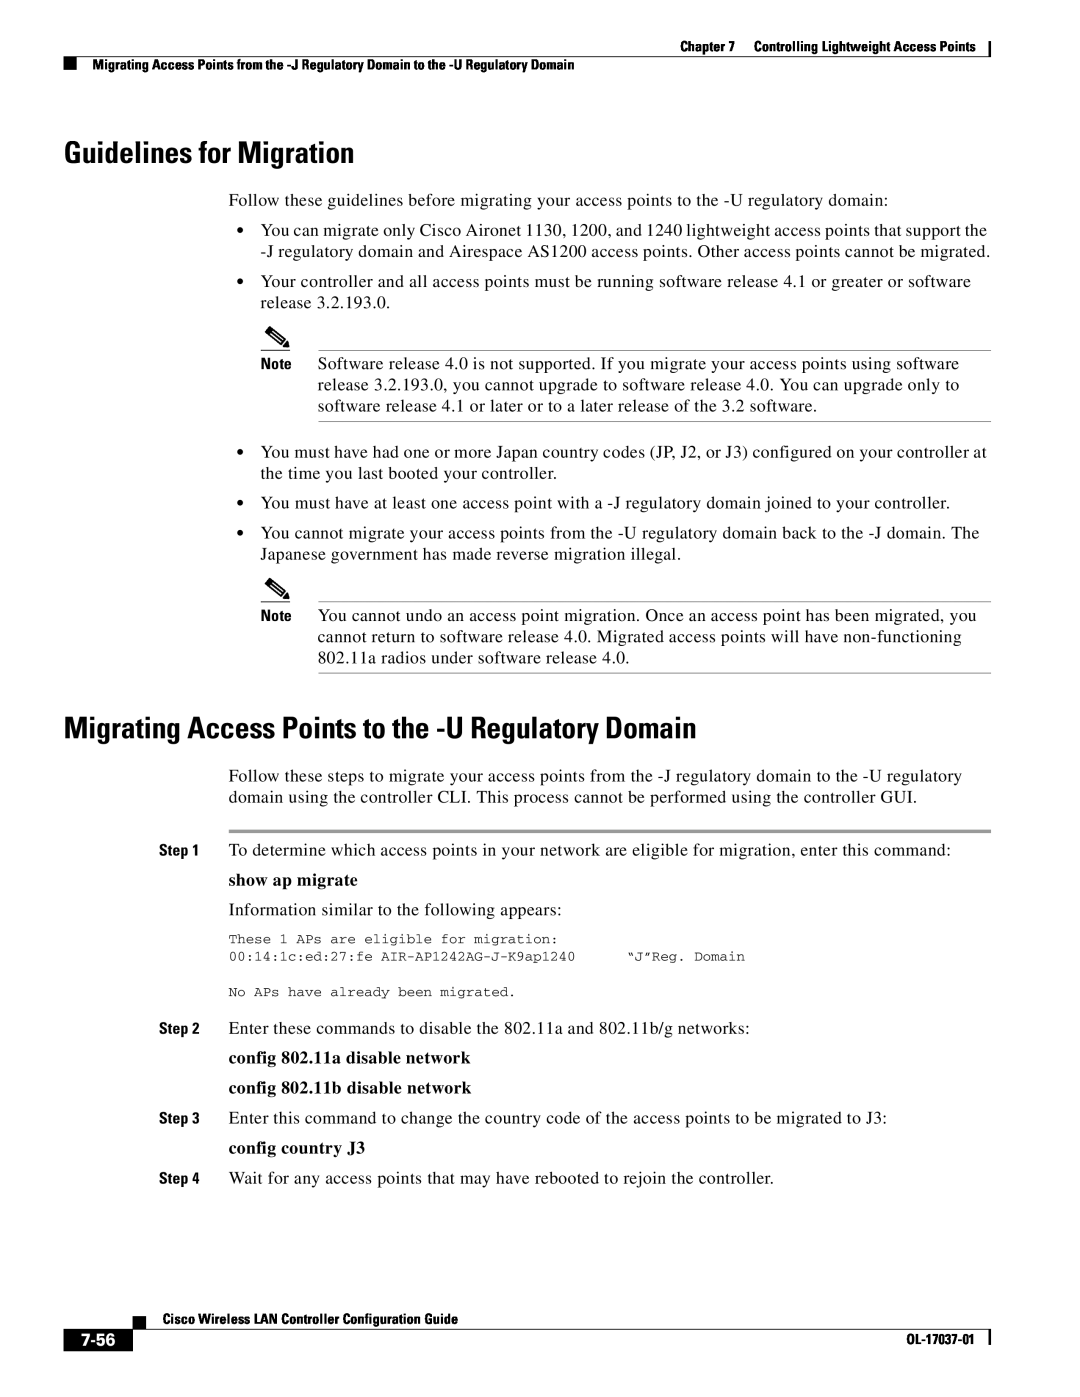 Cisco Systems OL-17037-01 Guidelines for Migration, Migrating Access Points to the -U Regulatory Domain, show ap migrate 